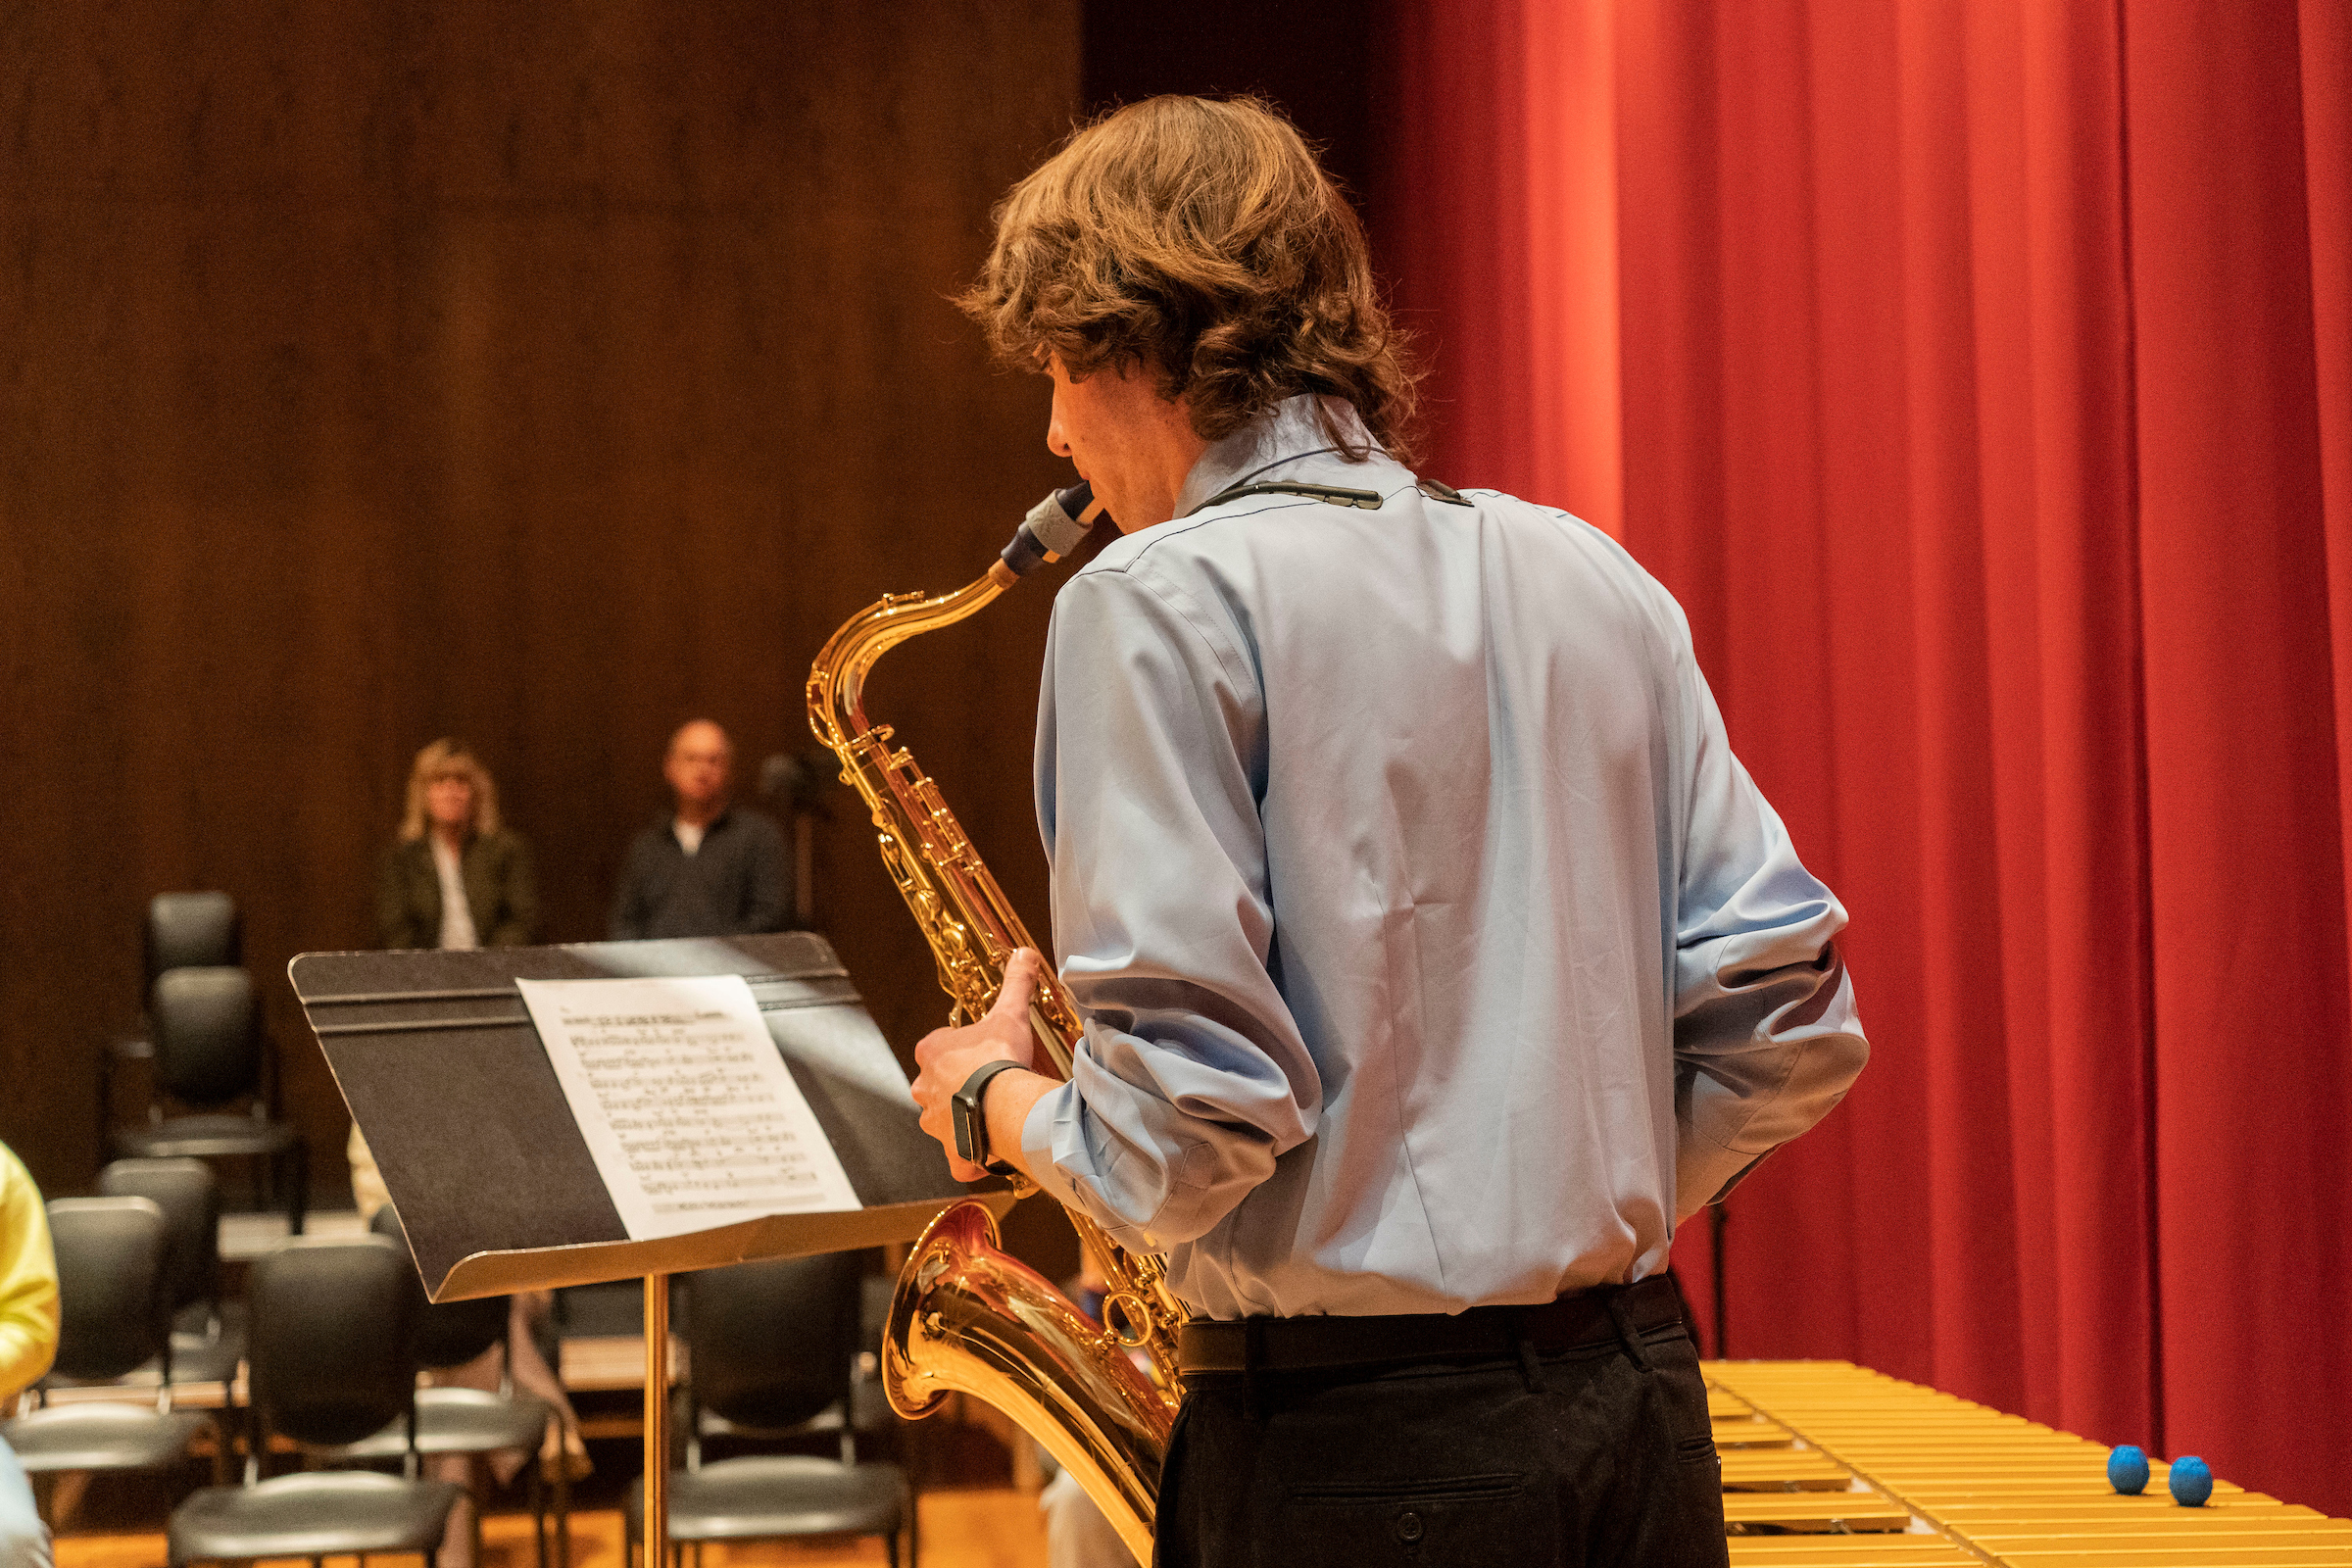 Student plays saxophone during common hour jazz performance